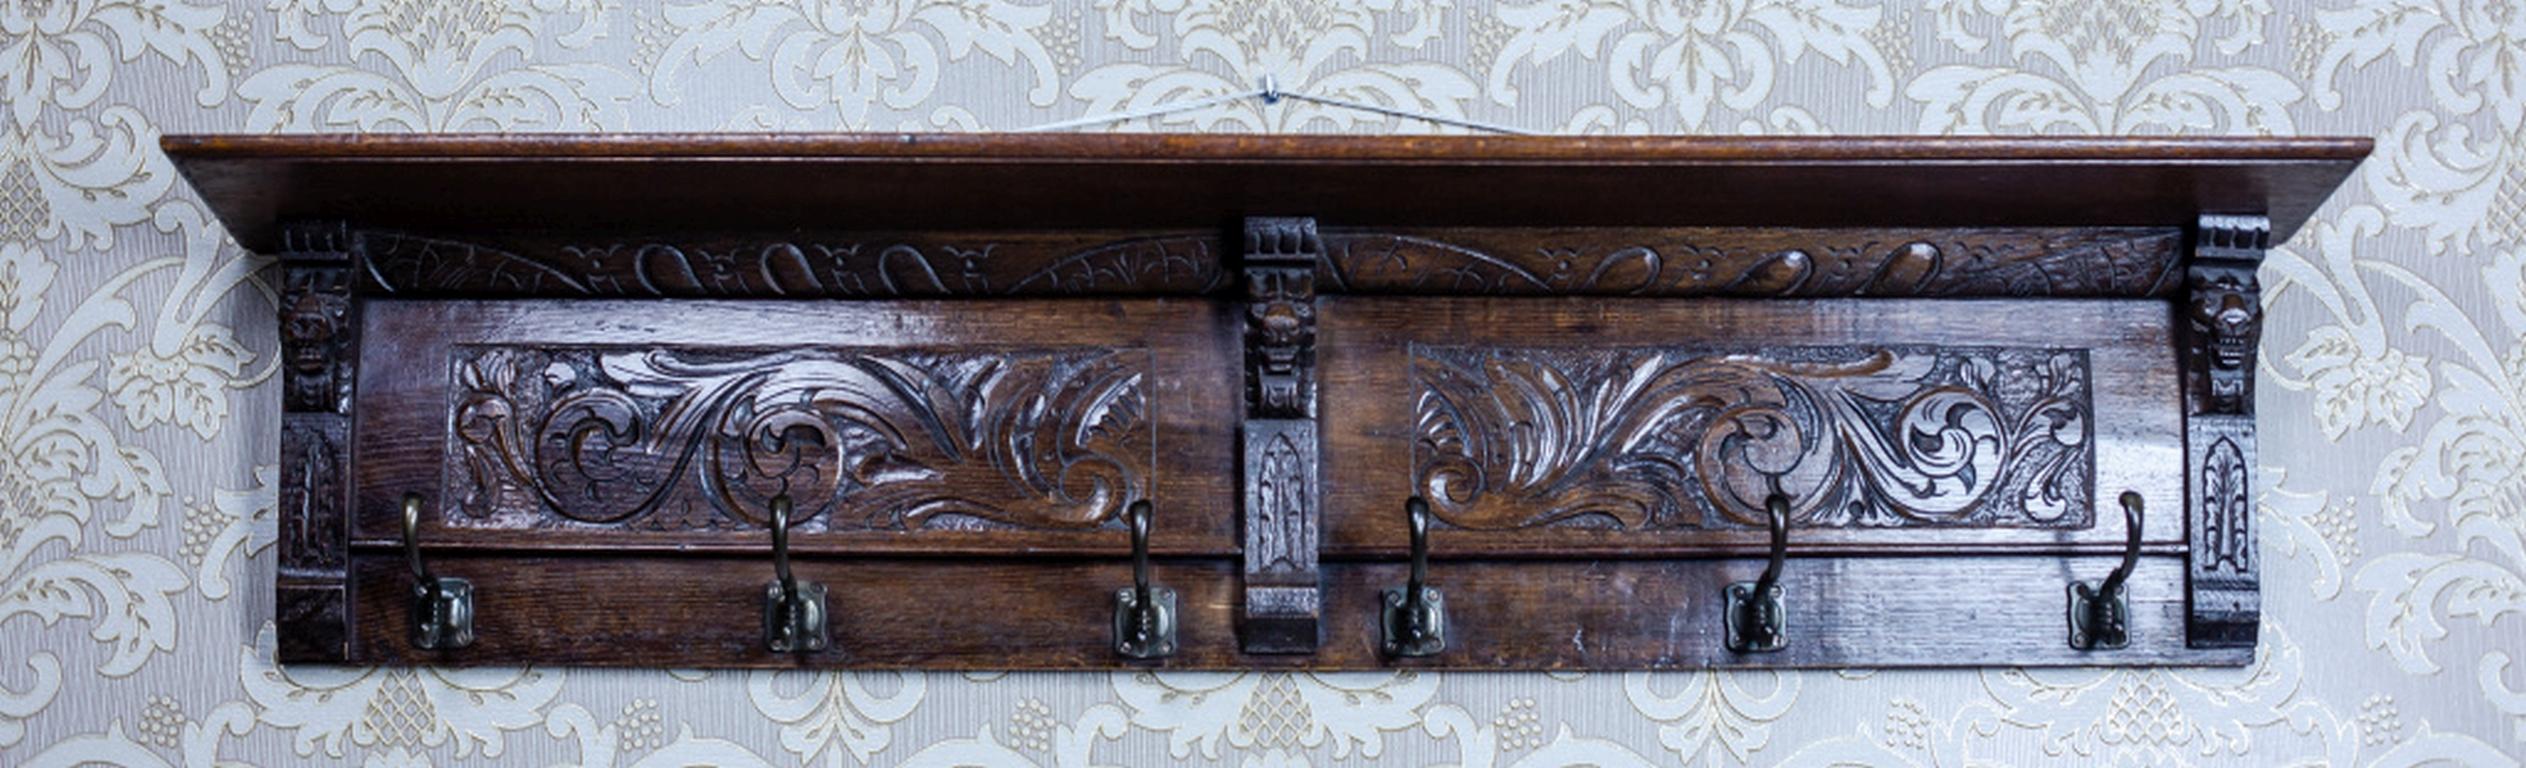 We present you a carved solid oak coat rack with metal hooks.
There are two rectangular fields on the rear wall of the coat rack which is covered with a carved decoration.
The whole is topped with an advanced cornice, which forms a